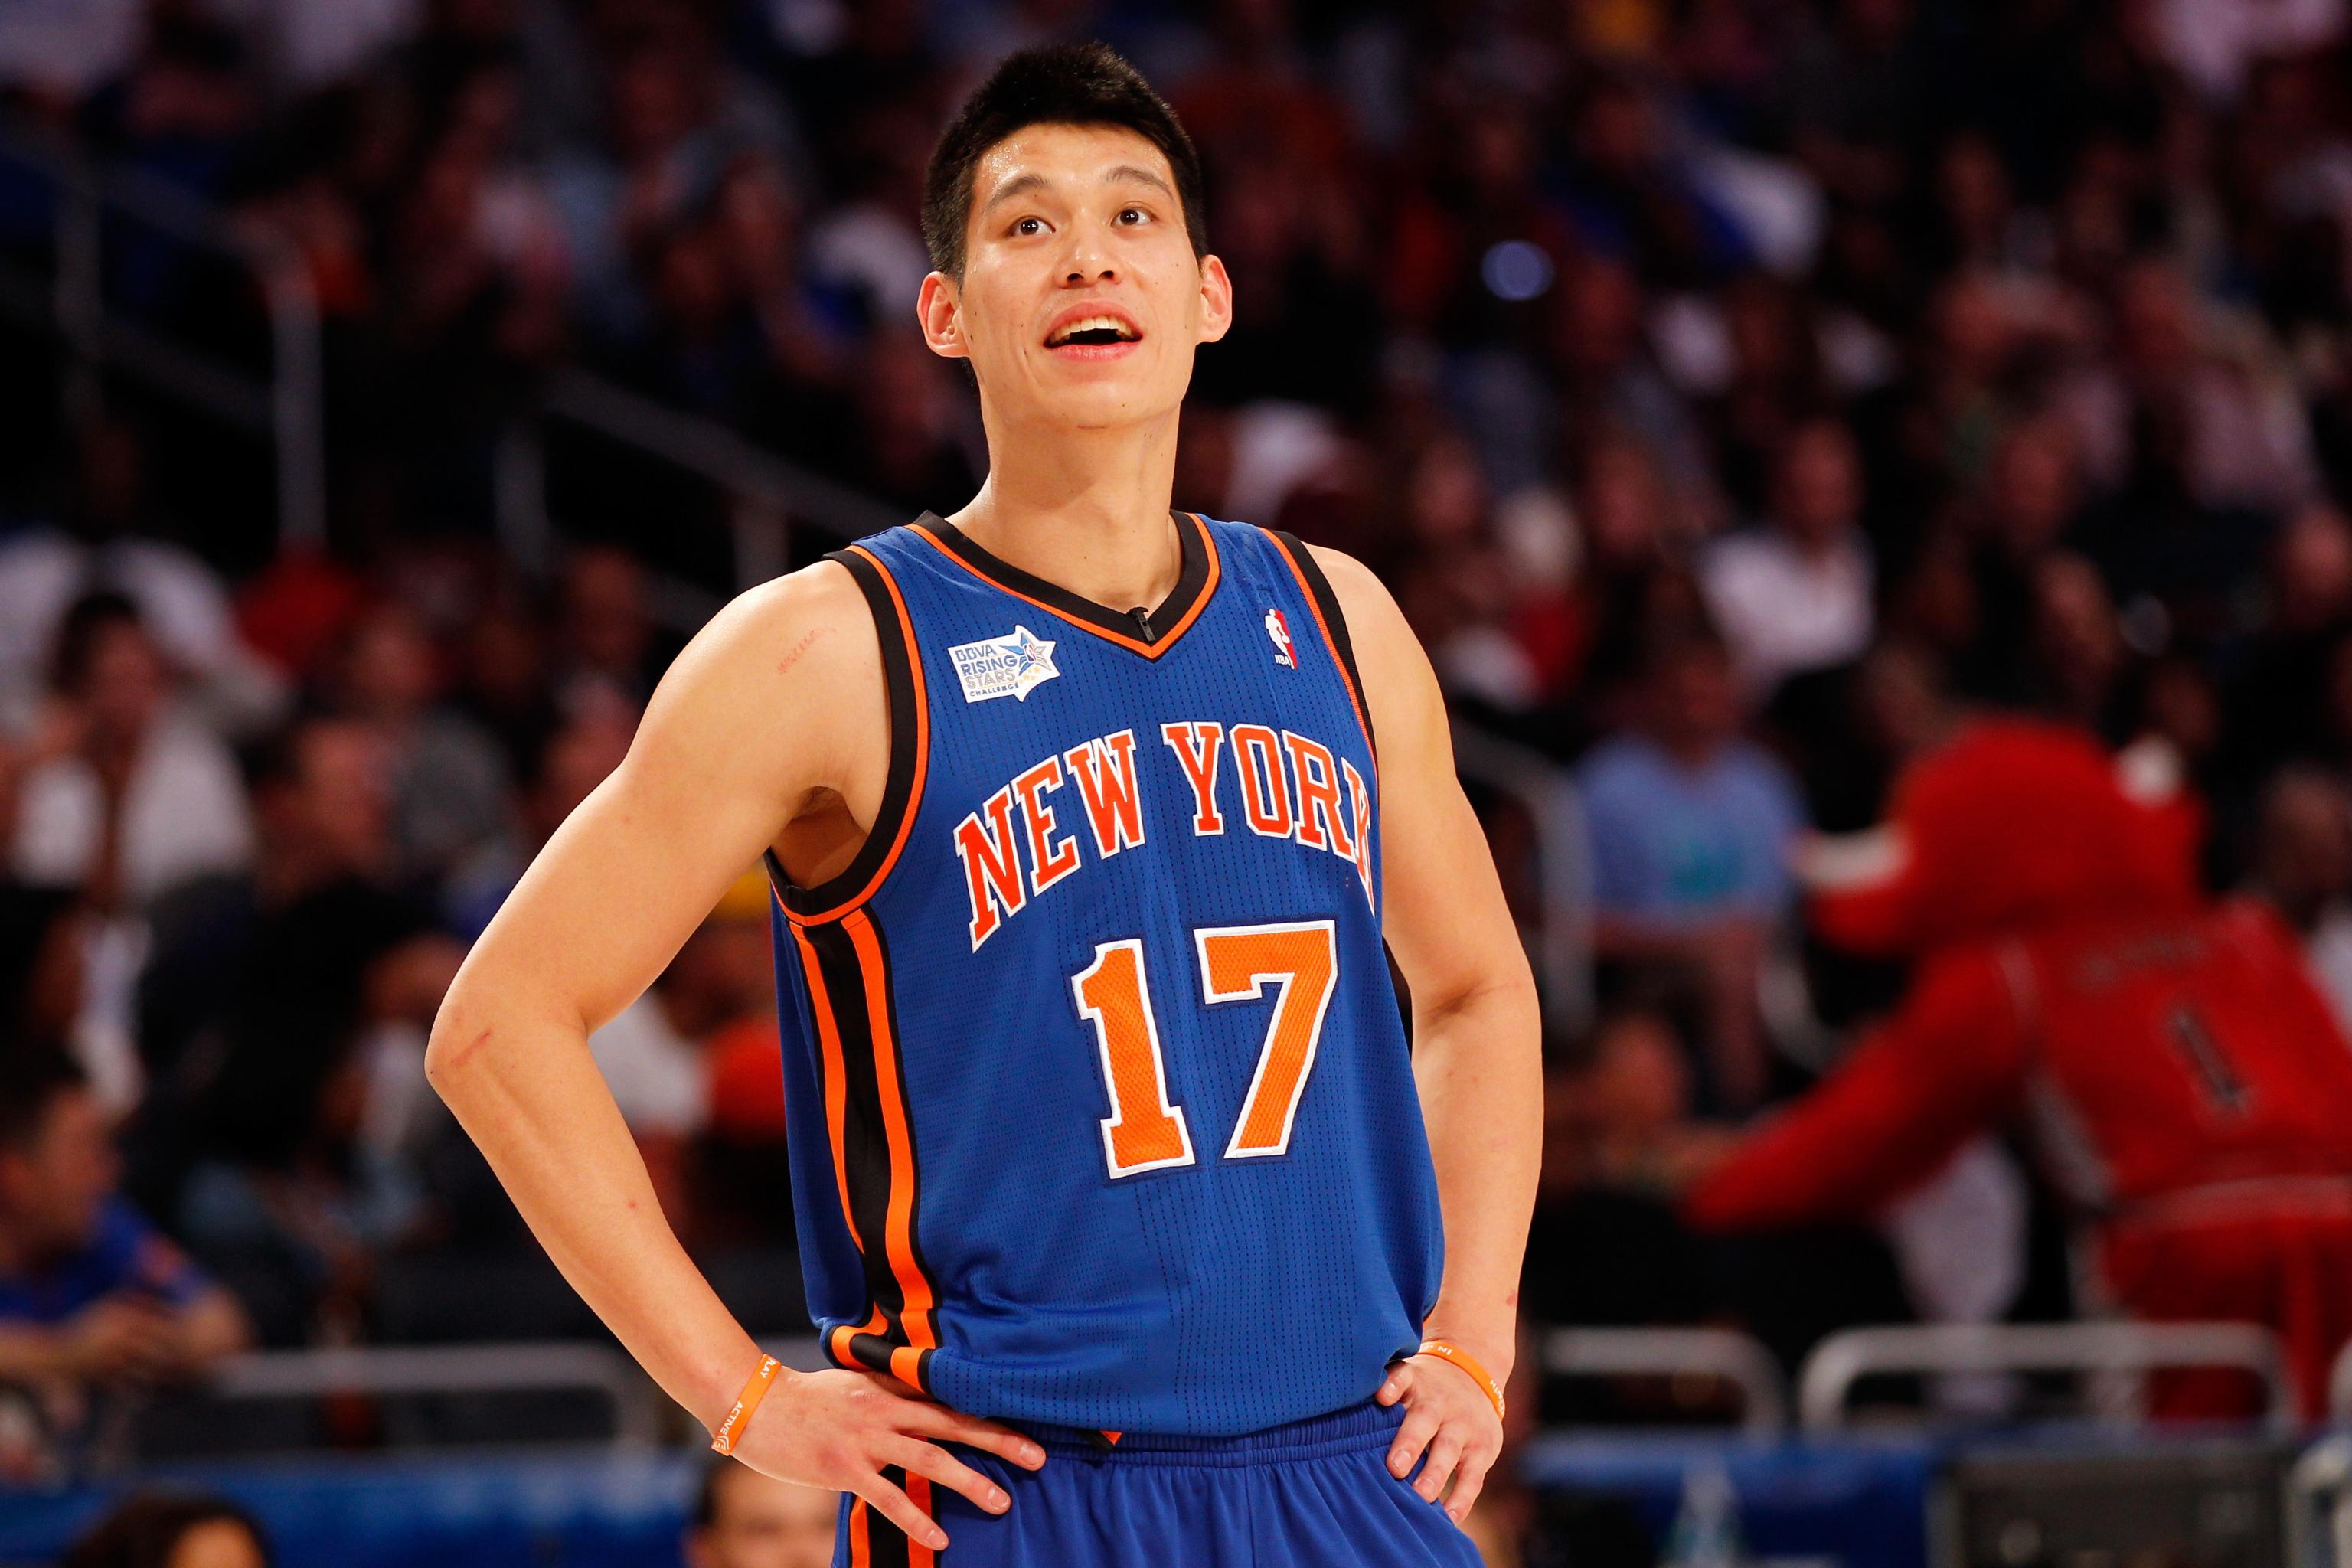 Harvard in the NBA: Jeremy Lin Earns First Start with New York